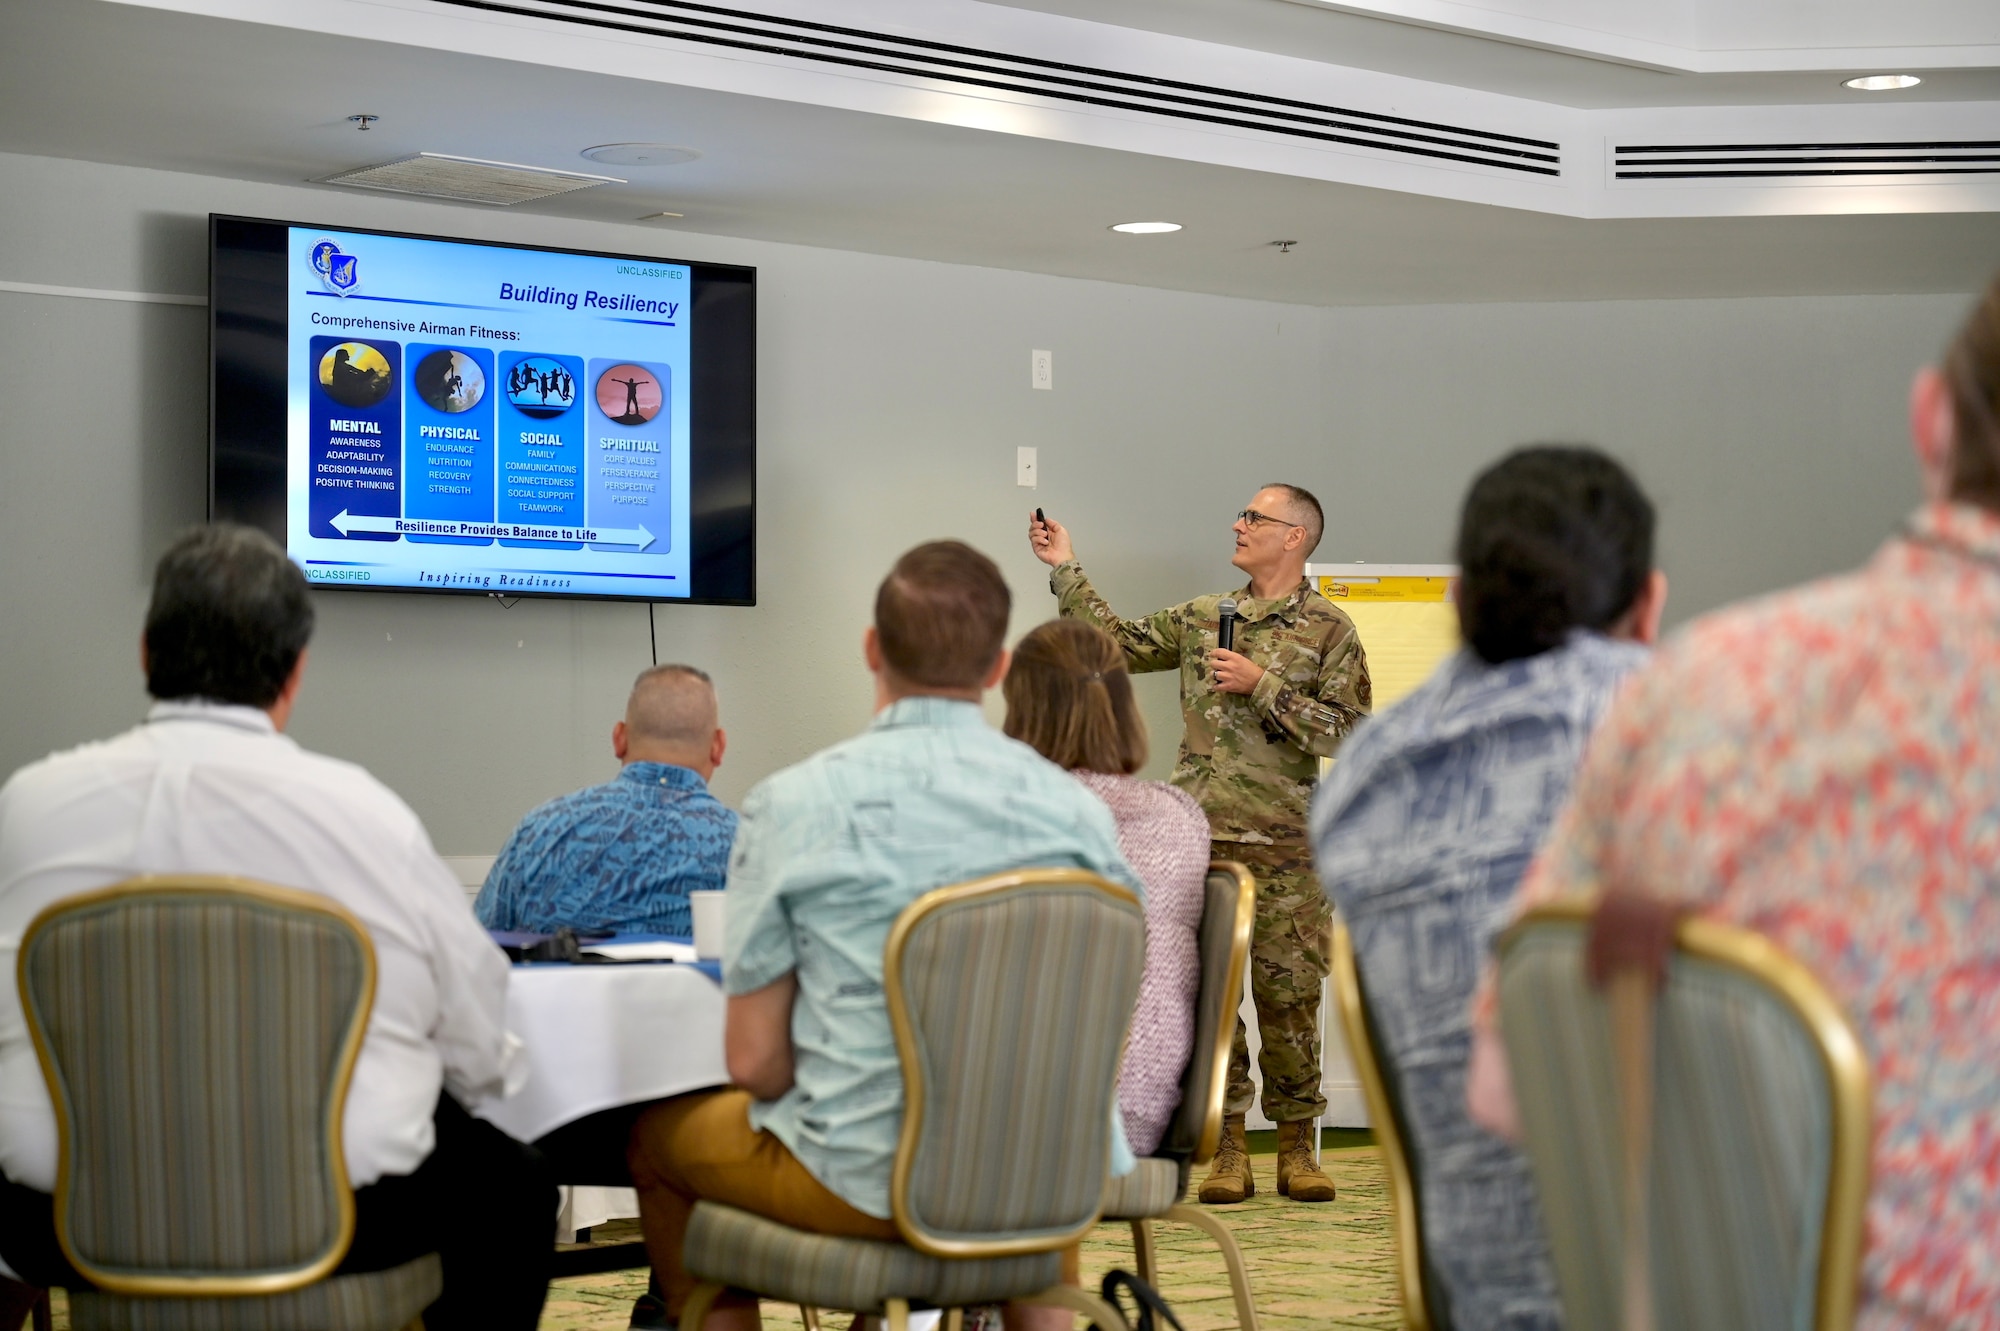 Col. Christopher LaPack, Pacific Air Forces command chaplain, briefs local religious leaders on the role of chaplains in the Air Force during a Cultural Religious Leader Engagement event at Joint Base Pearl Harbor-Hickam, Hawaii, May 12, 2022. Chaplain LaPack not only briefed on the role of spirituality as part of comprehensive Airman fitness, but the partnerships the PACAF chaplain team has with countries throughout the Indo-Pacific. (U.S. Air Force photo by 1st Lt. Benjamin Aronson)